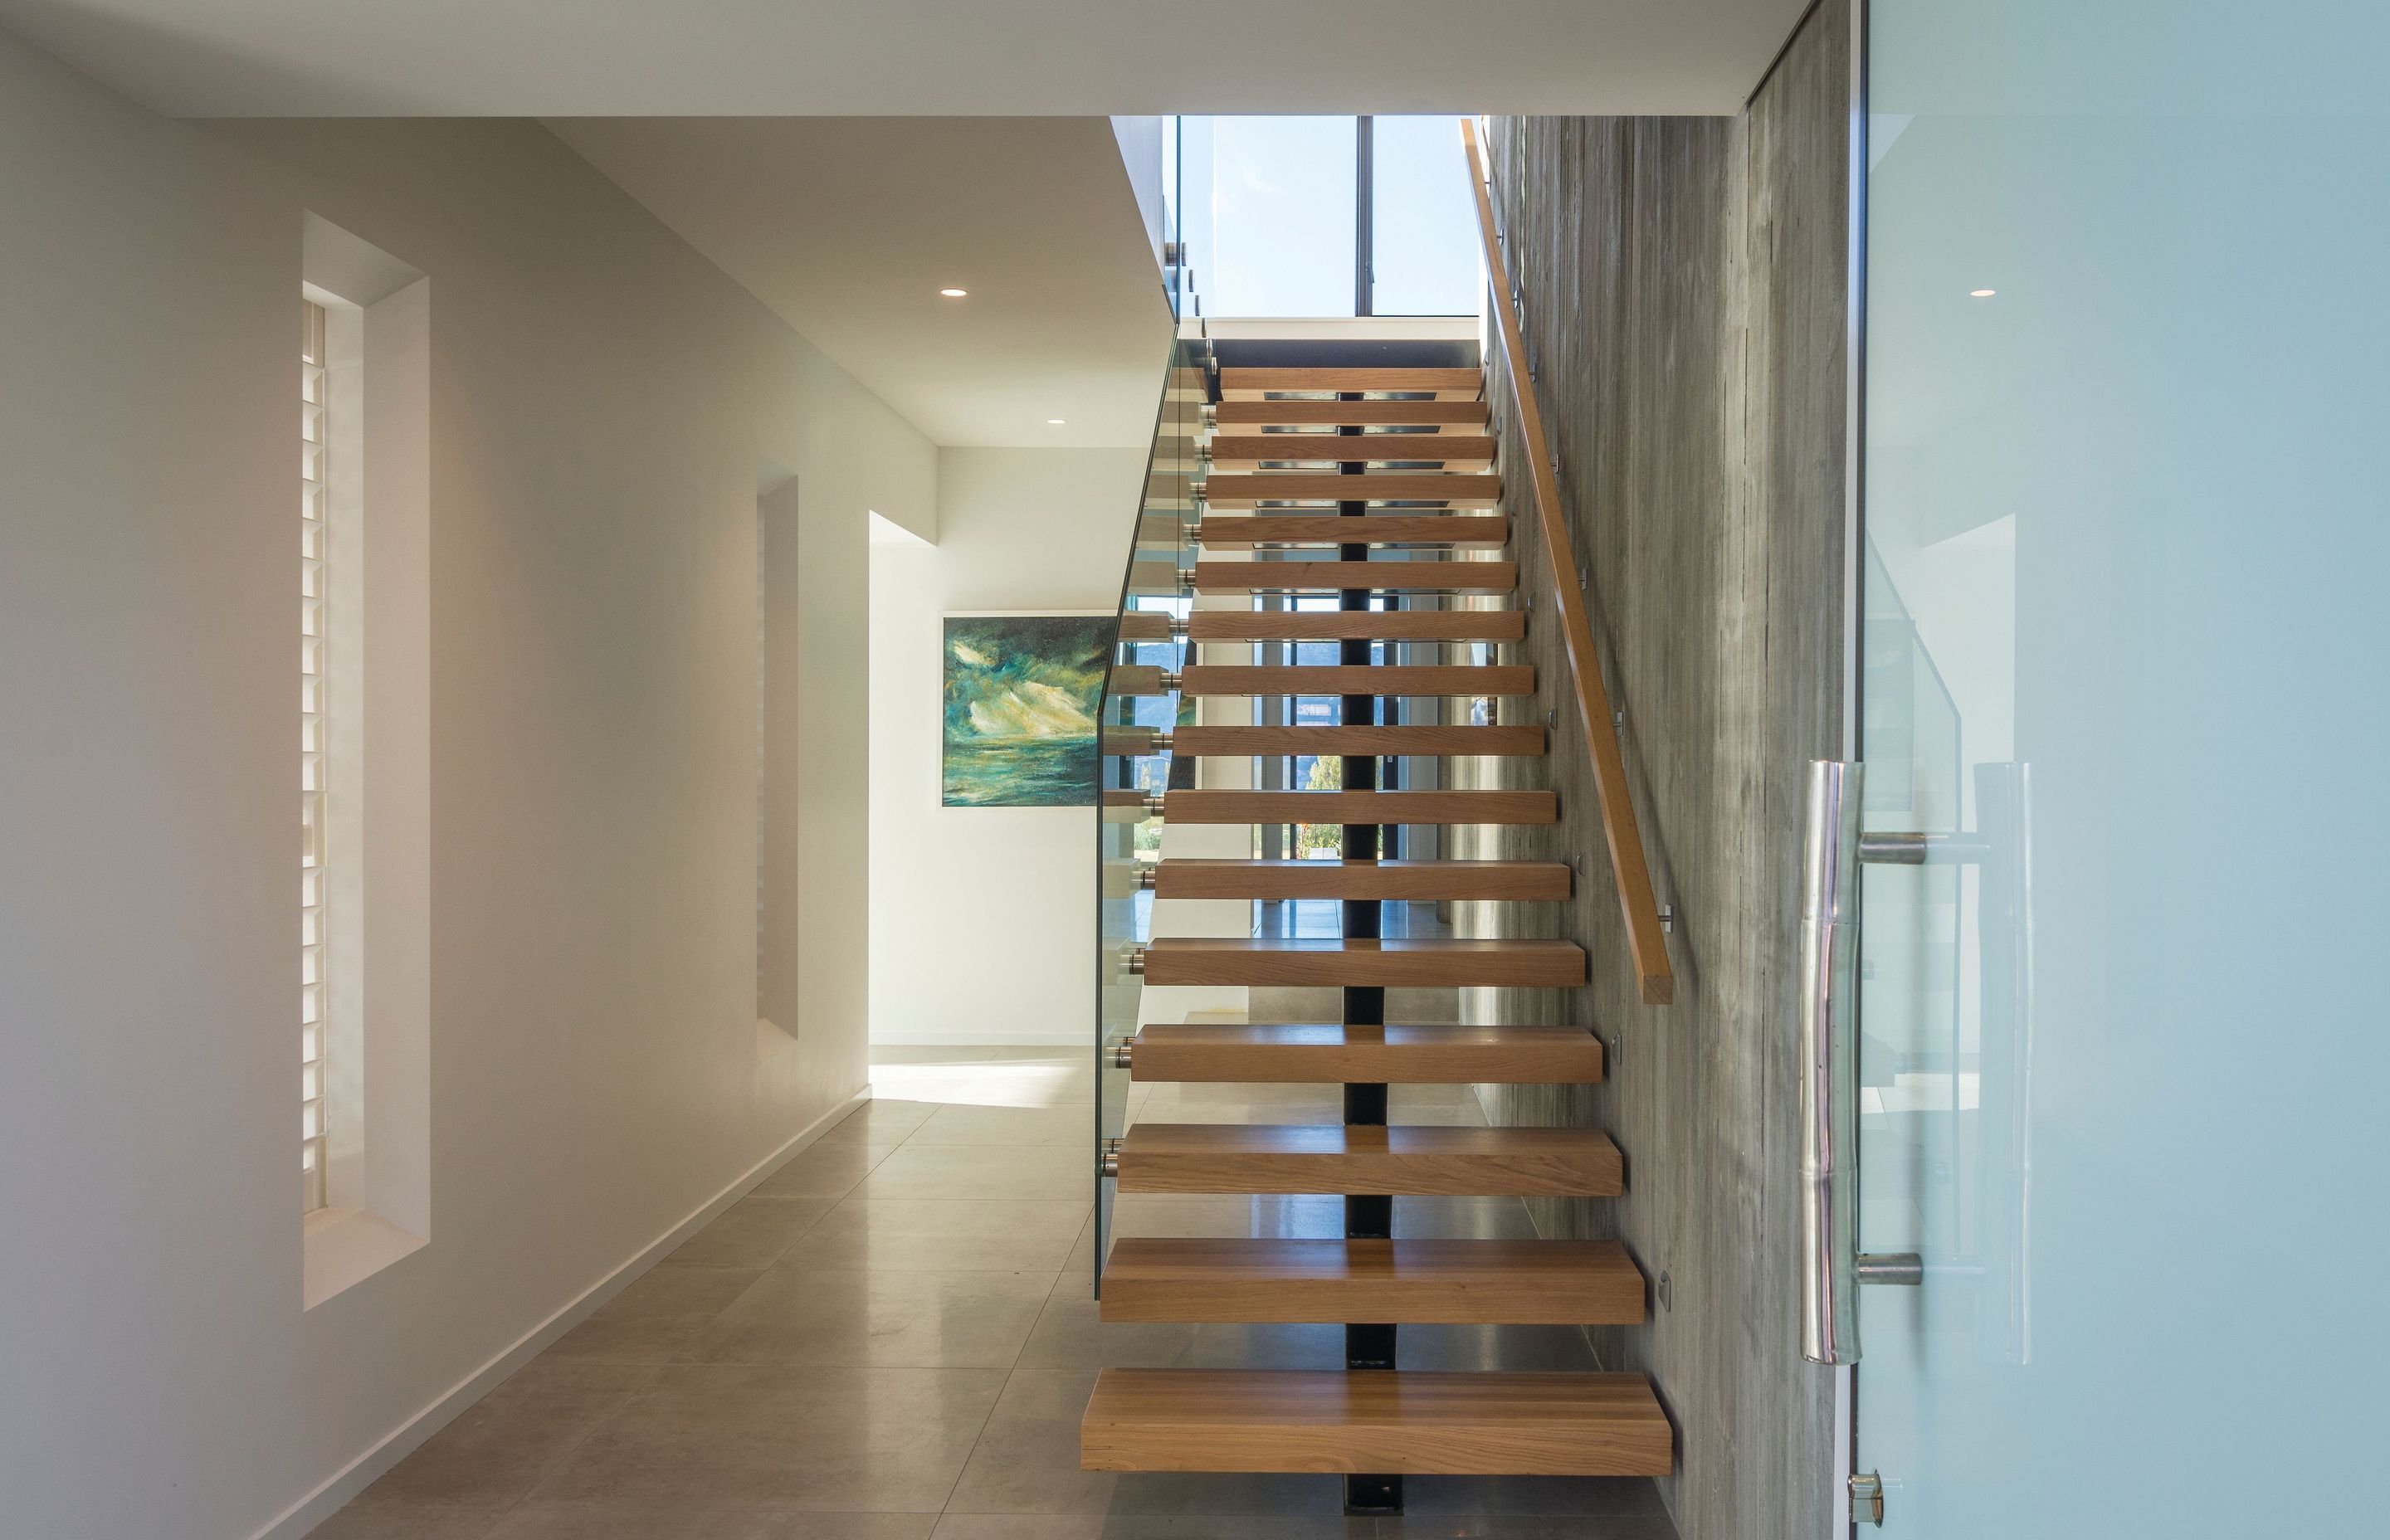 Frameless glass balustrades flanking a staircase.